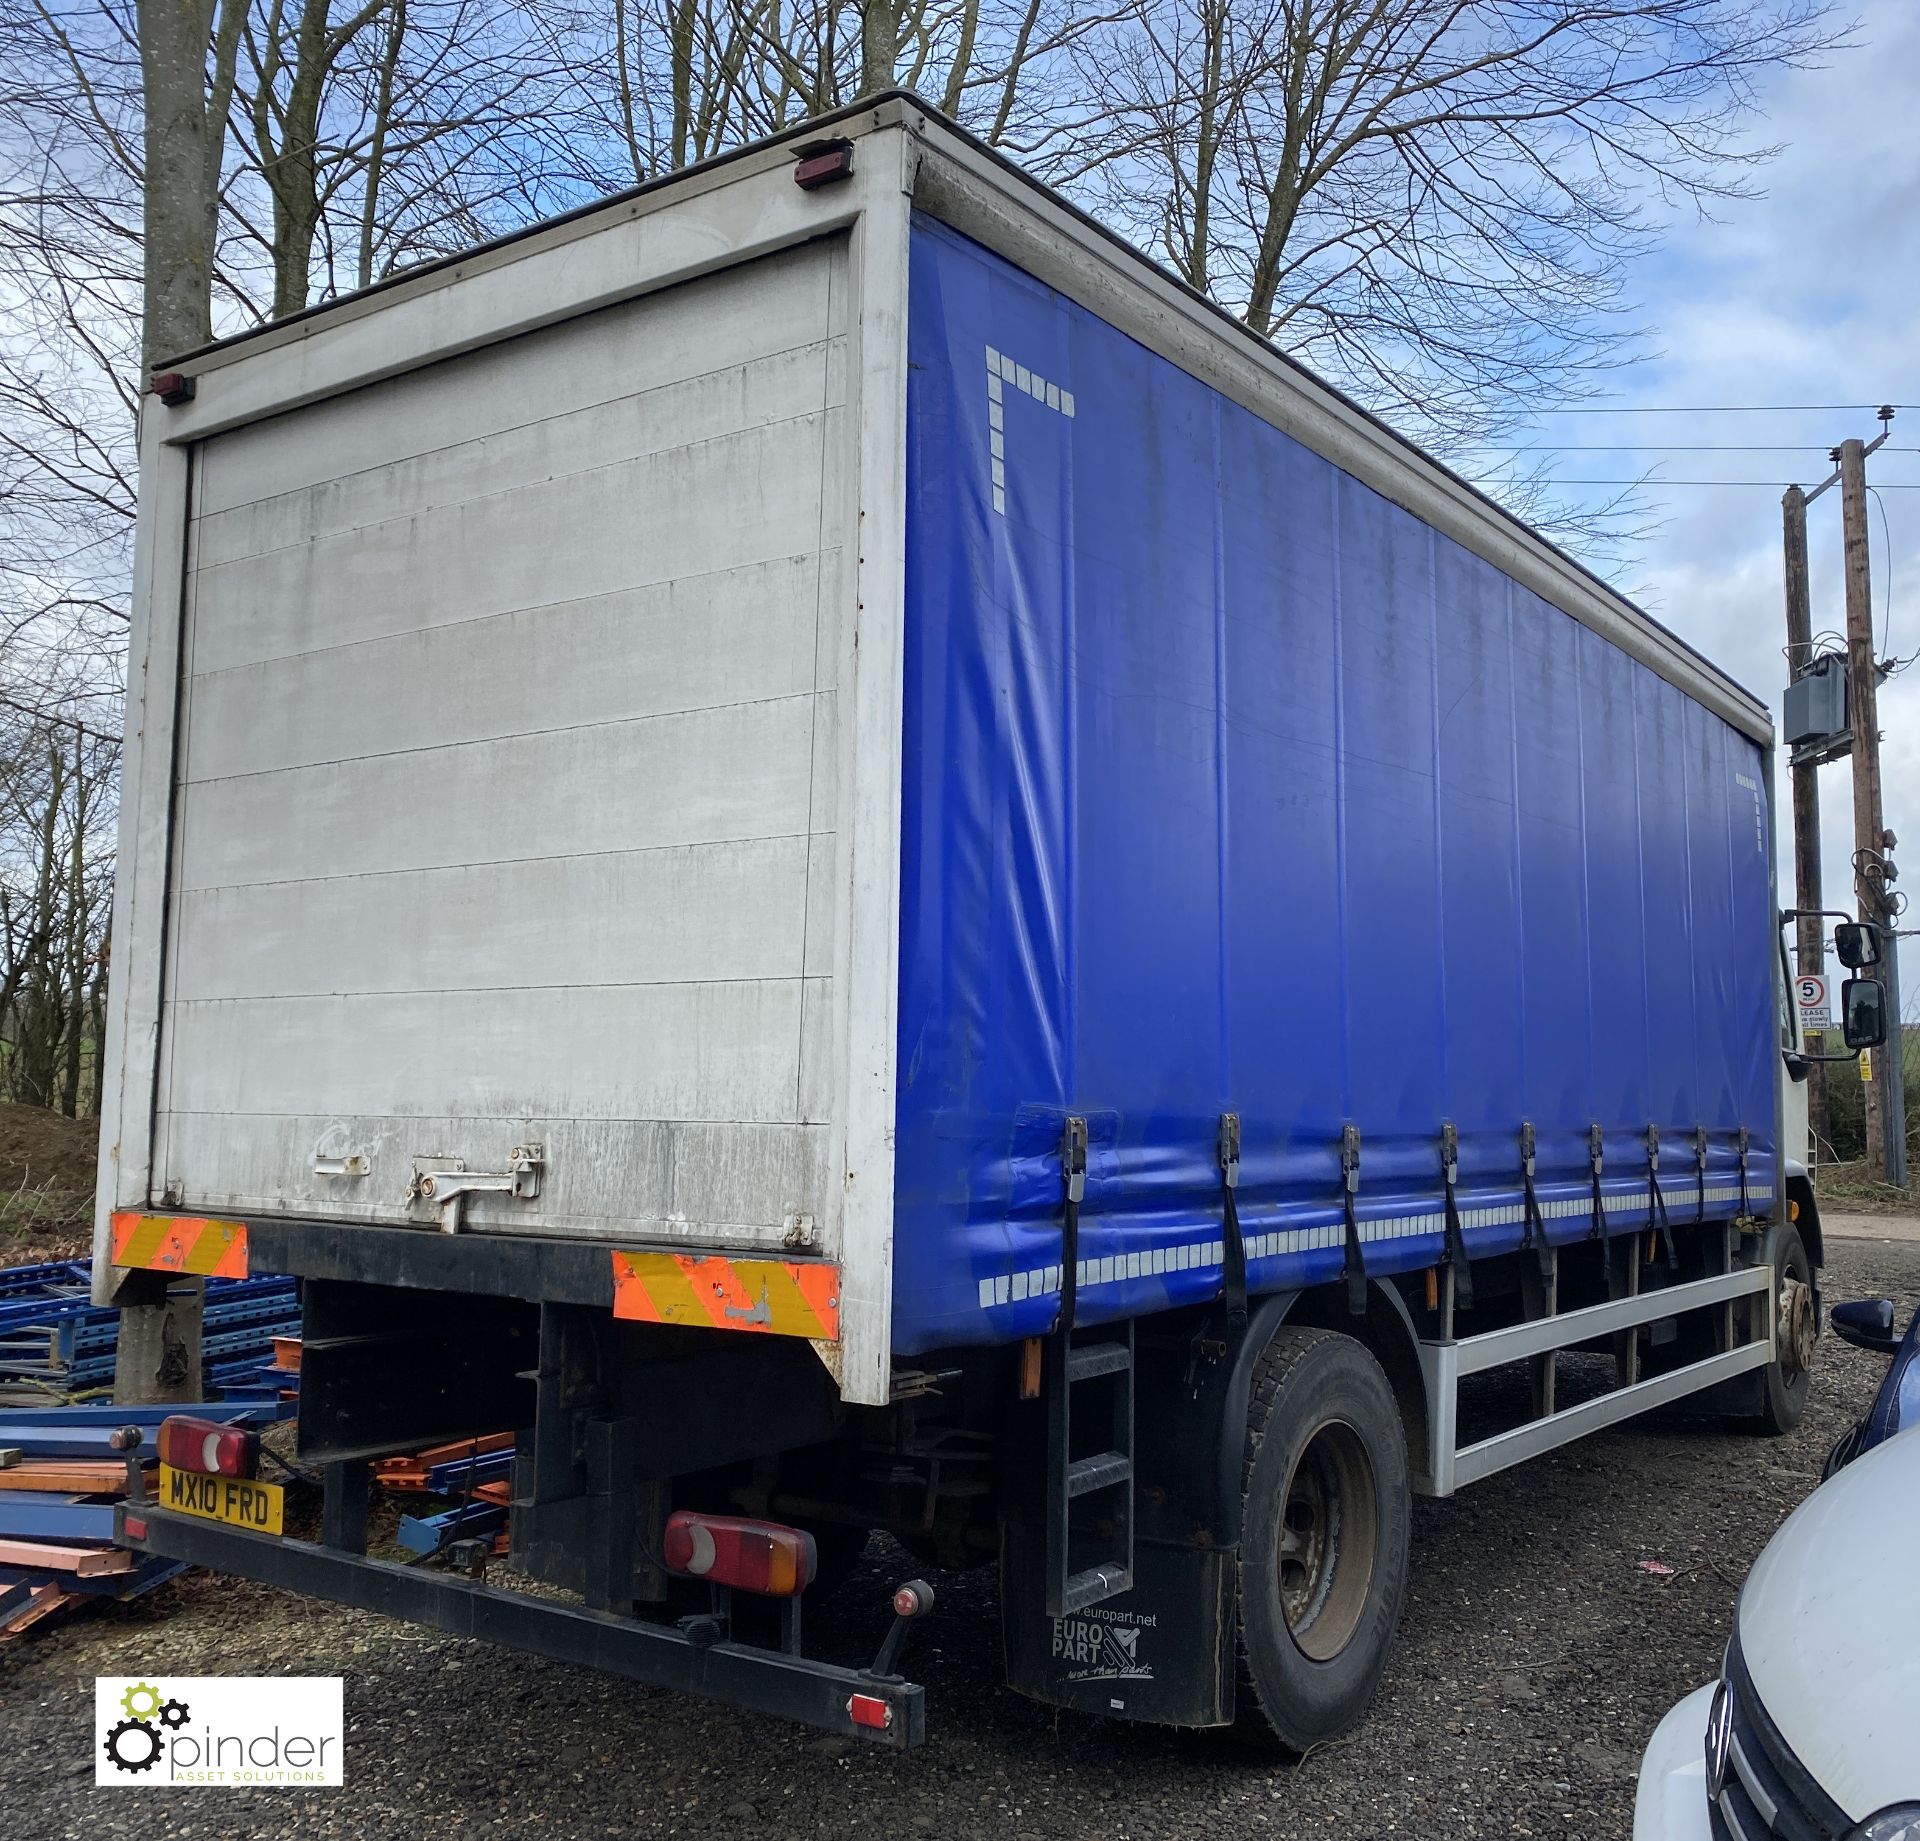 DAF FA LF 55.220 Curtainside Truck, day cab, with Bevan curtainside body, 6750mm, Registration: MX10 - Image 3 of 12